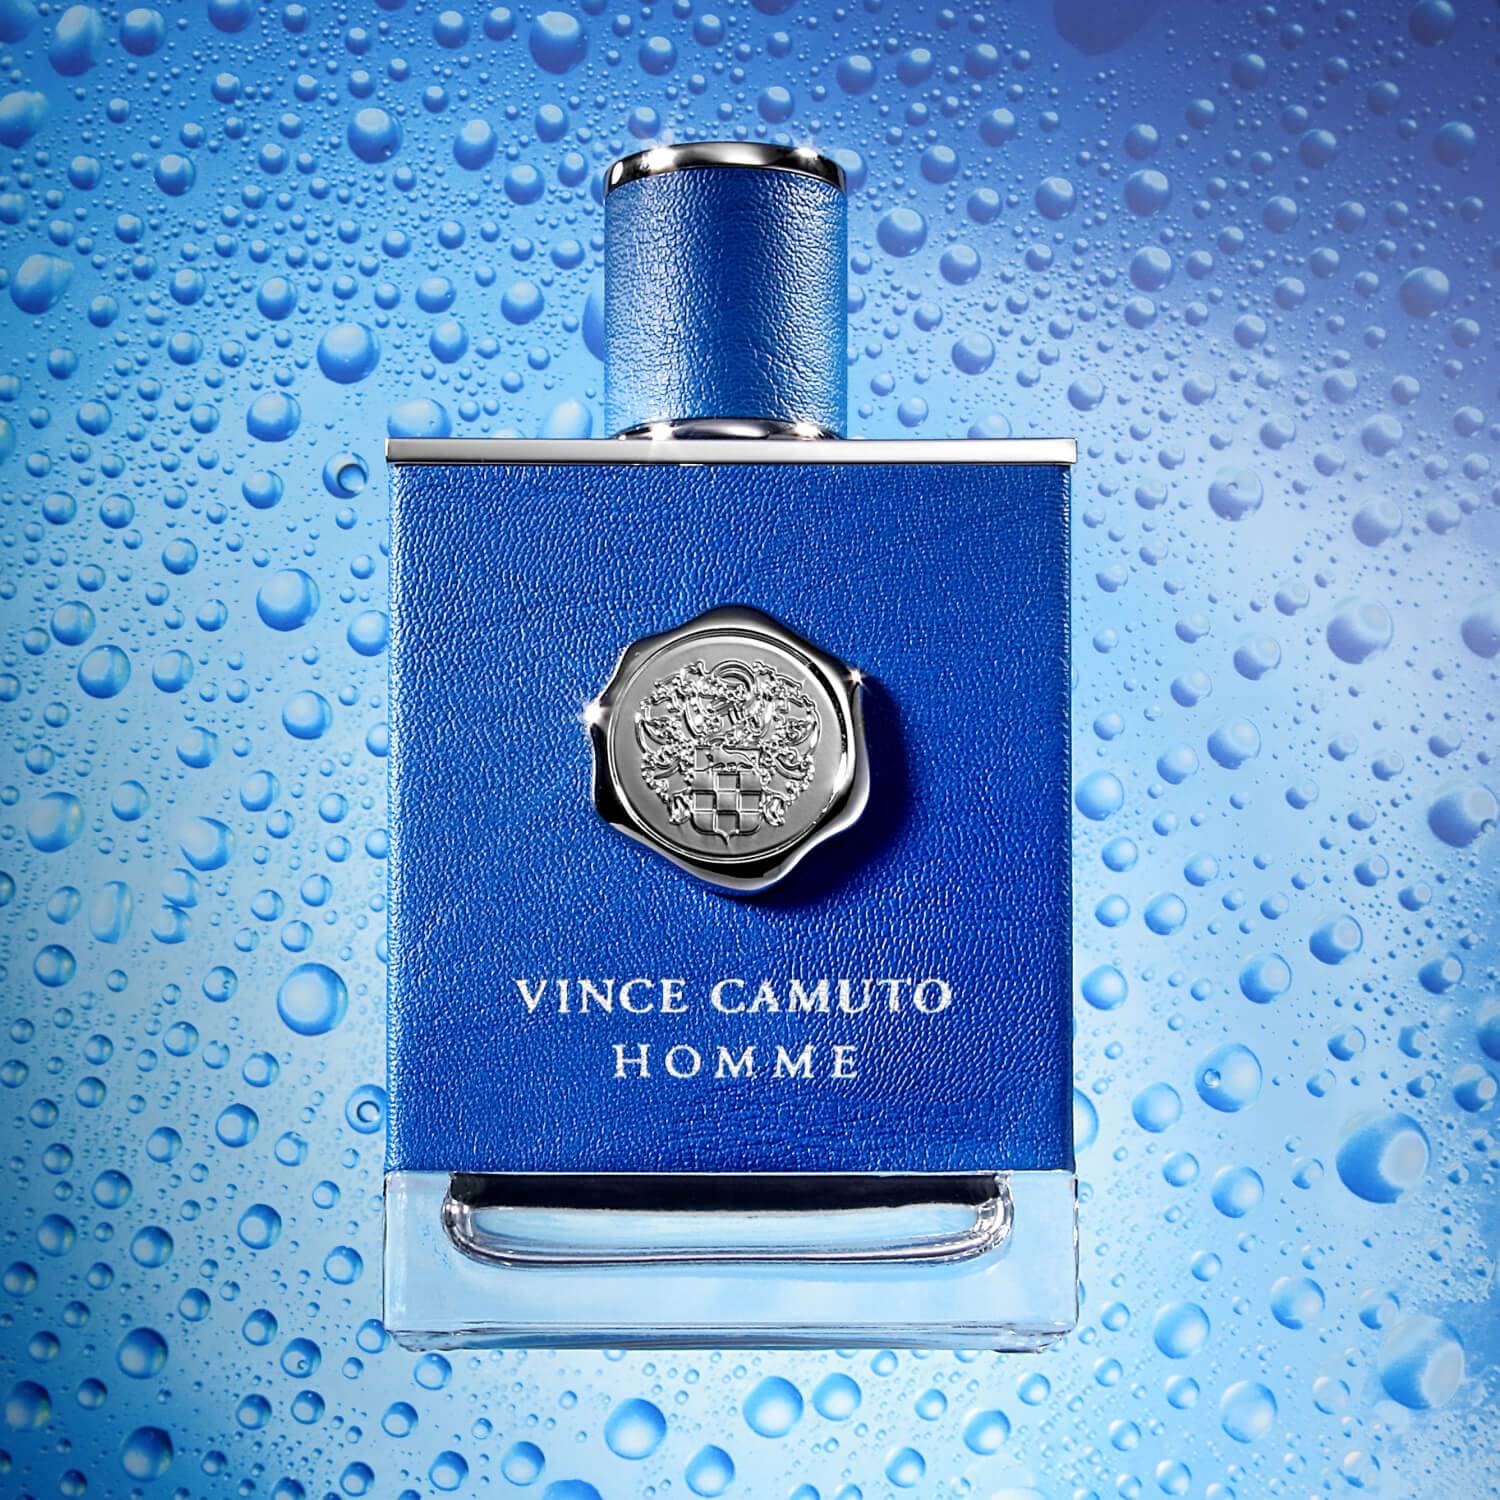 VINCE CAMUTO HOMME – Mr.Smell Good